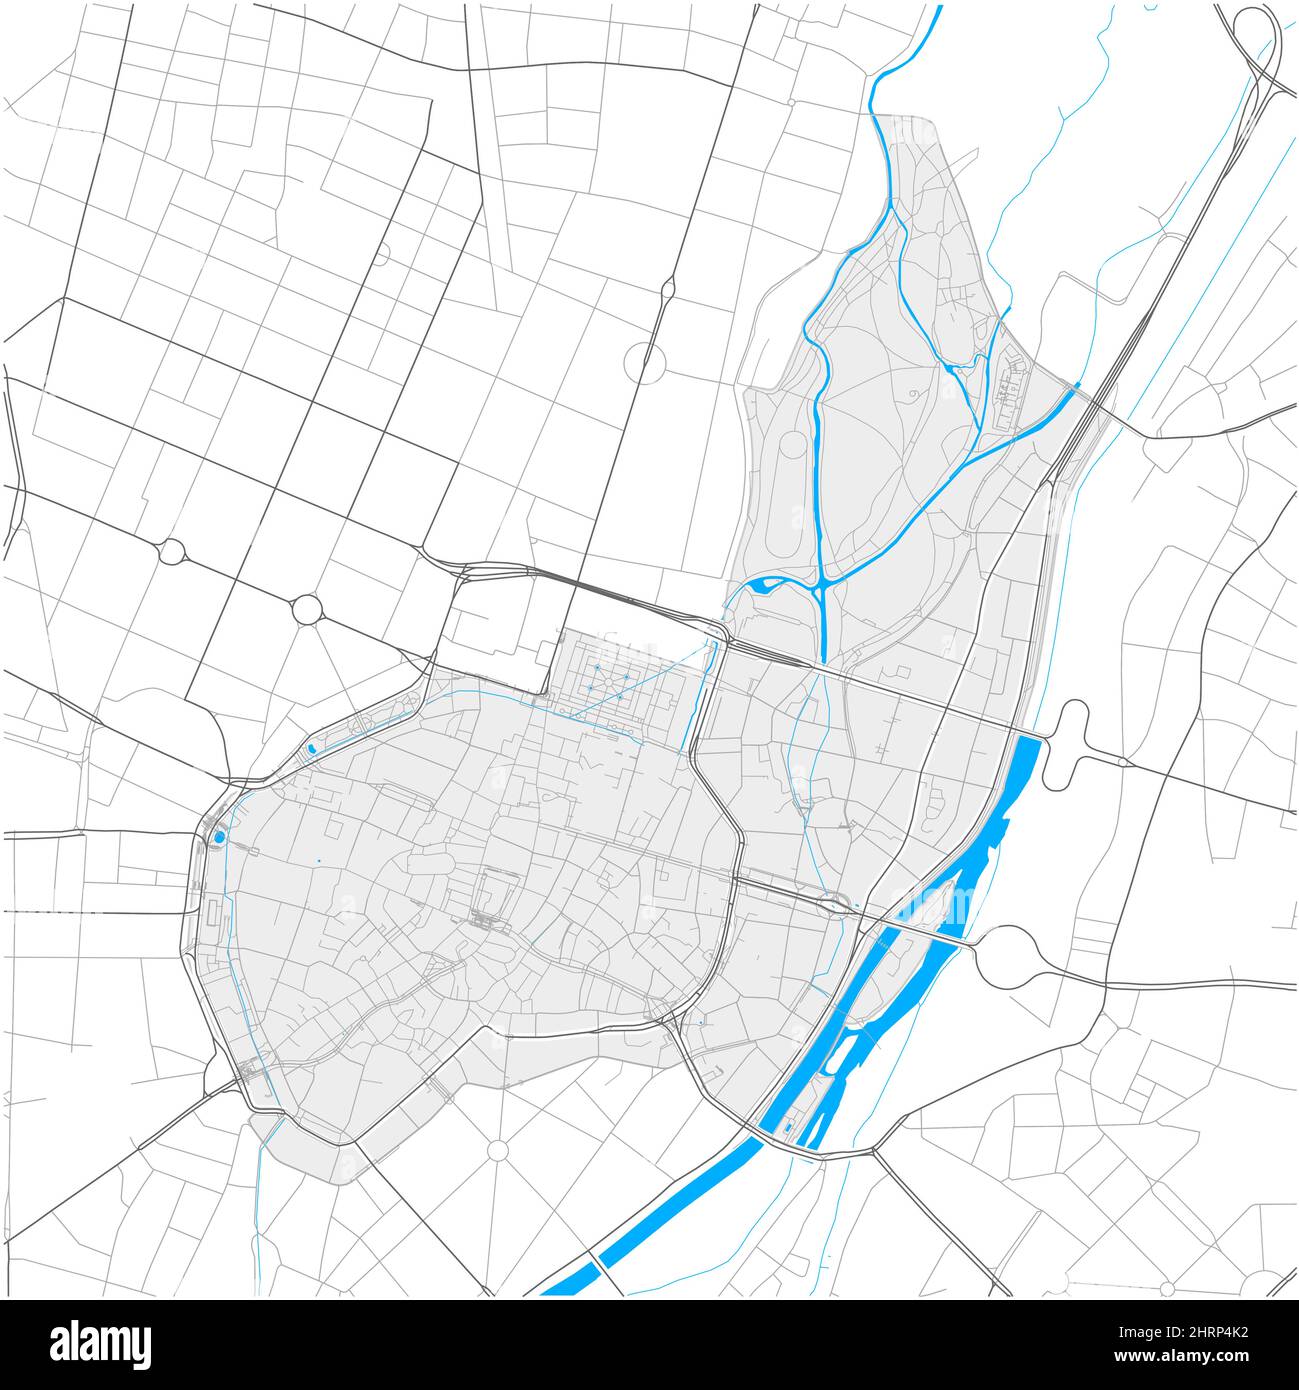 Altstadt-Lehel, München, DEUTSCHLAND, high detail vector map with city boundaries and editable paths. White outlines for main roads. Many smaller path Stock Vector